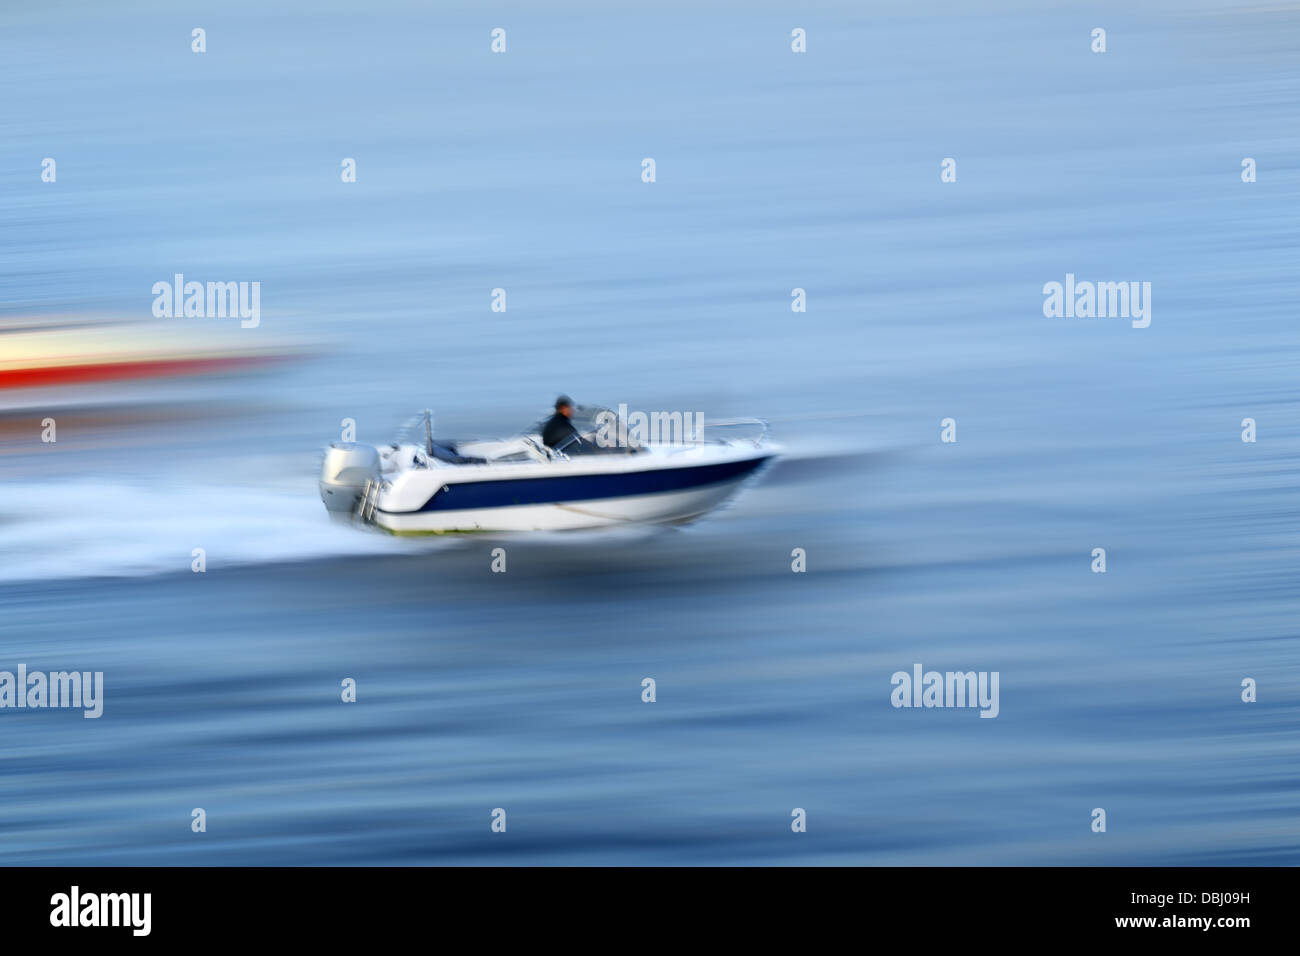 speed boat water transportation background Stock Photo